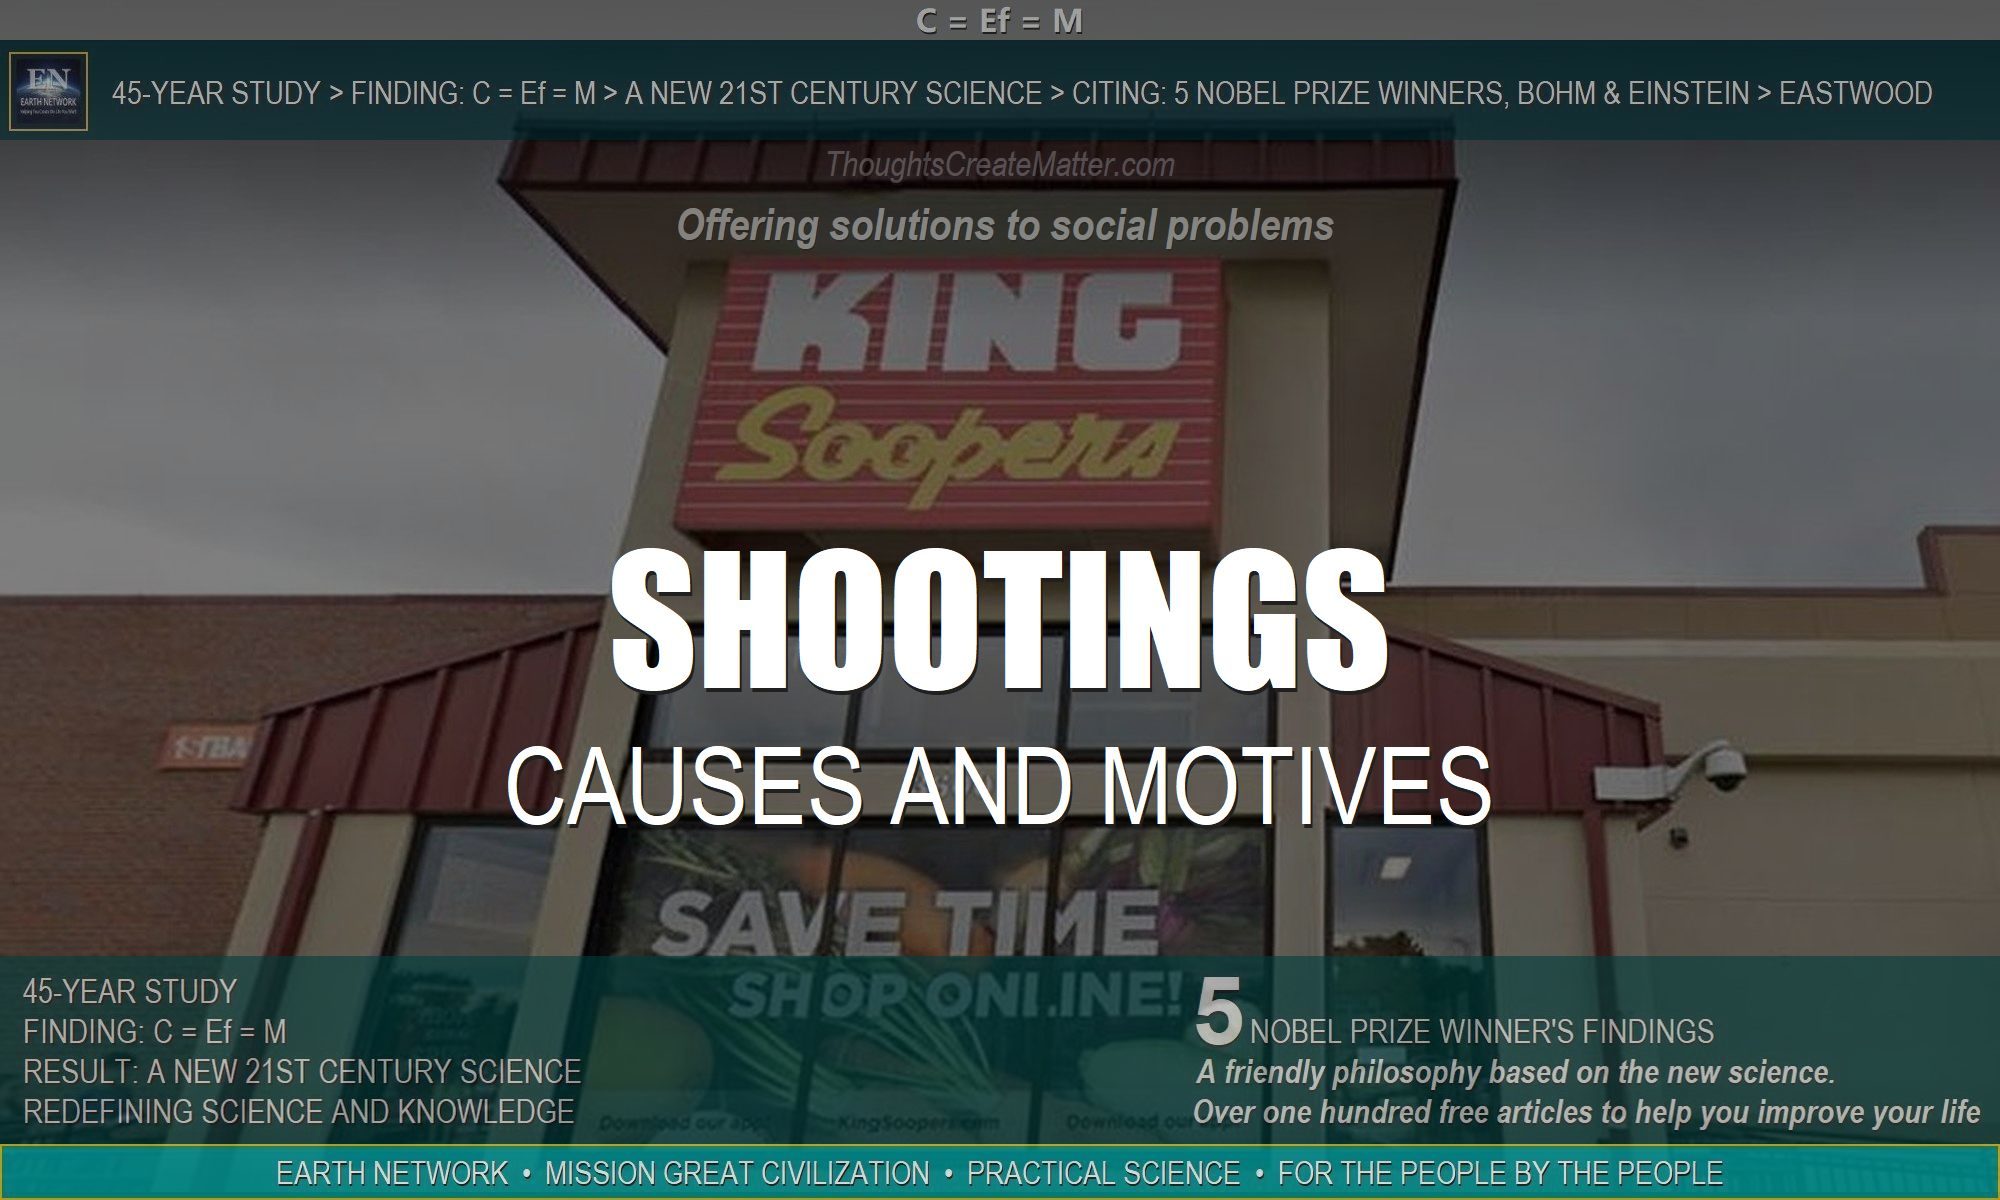 Supermarket in boulder Colorado depicts problem. What is the cause and motive of mass shootings?